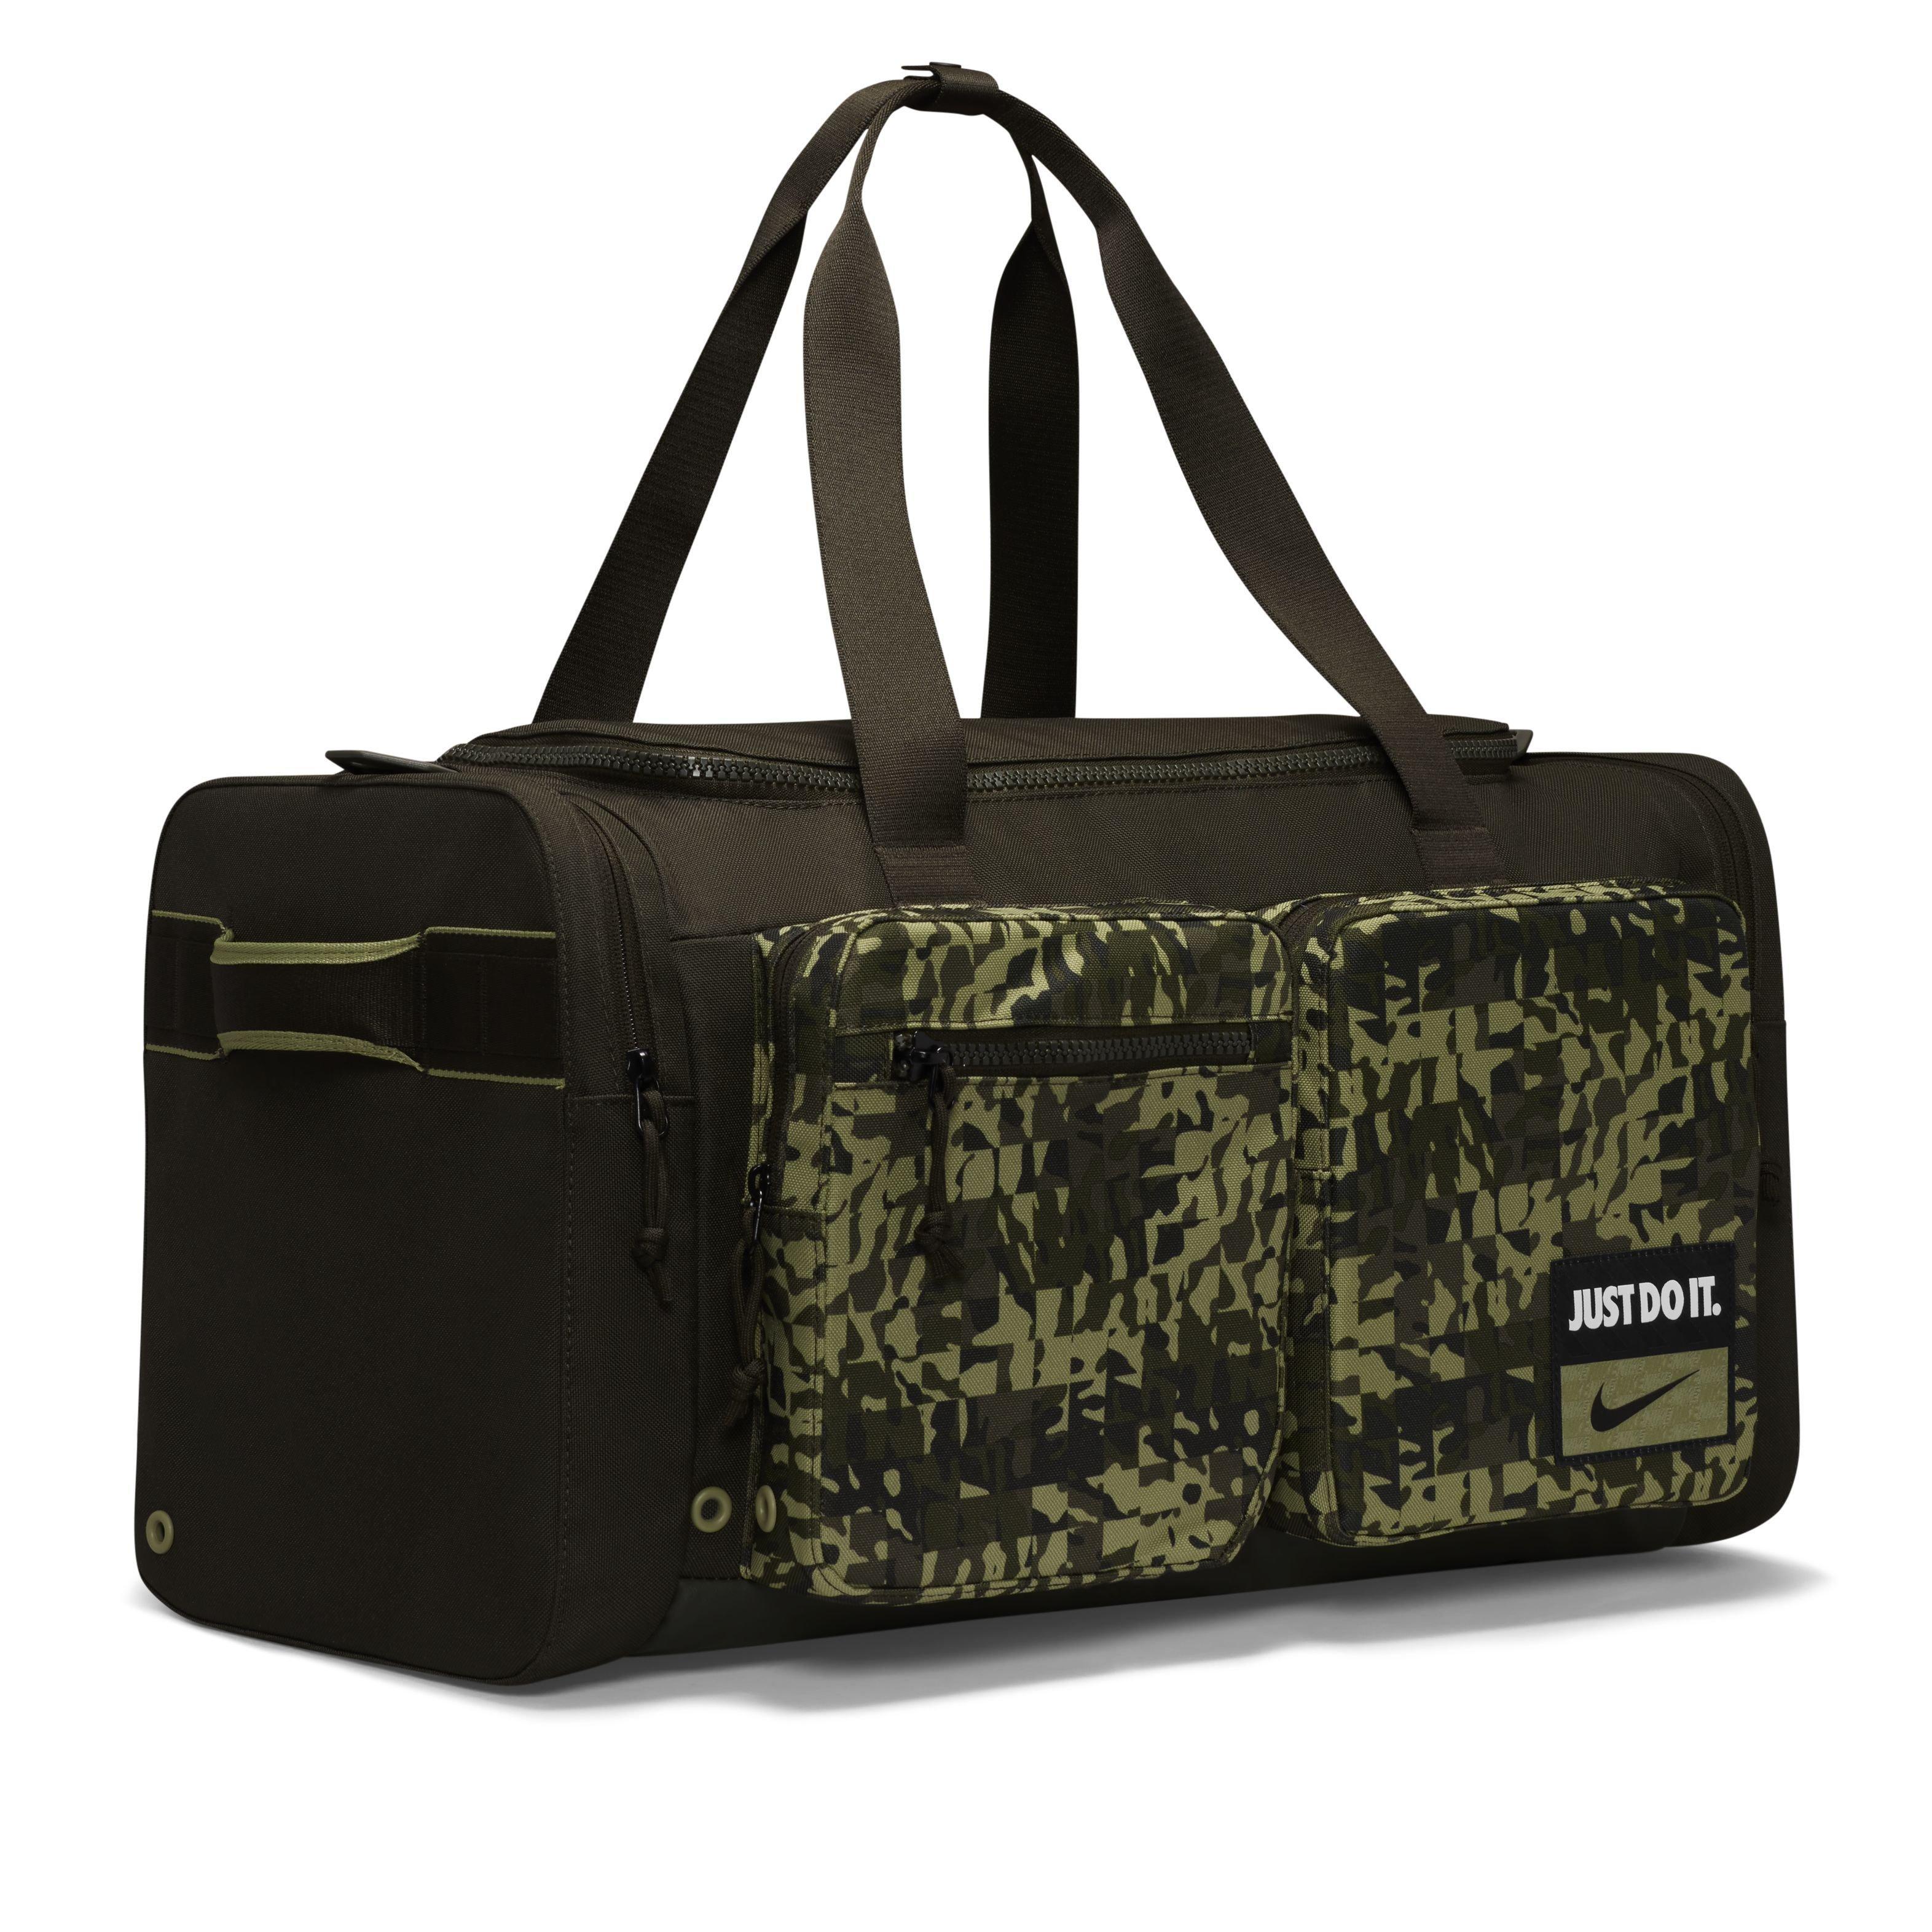 Buy Peach Sports & Utility Bag for Men by NIKE Online